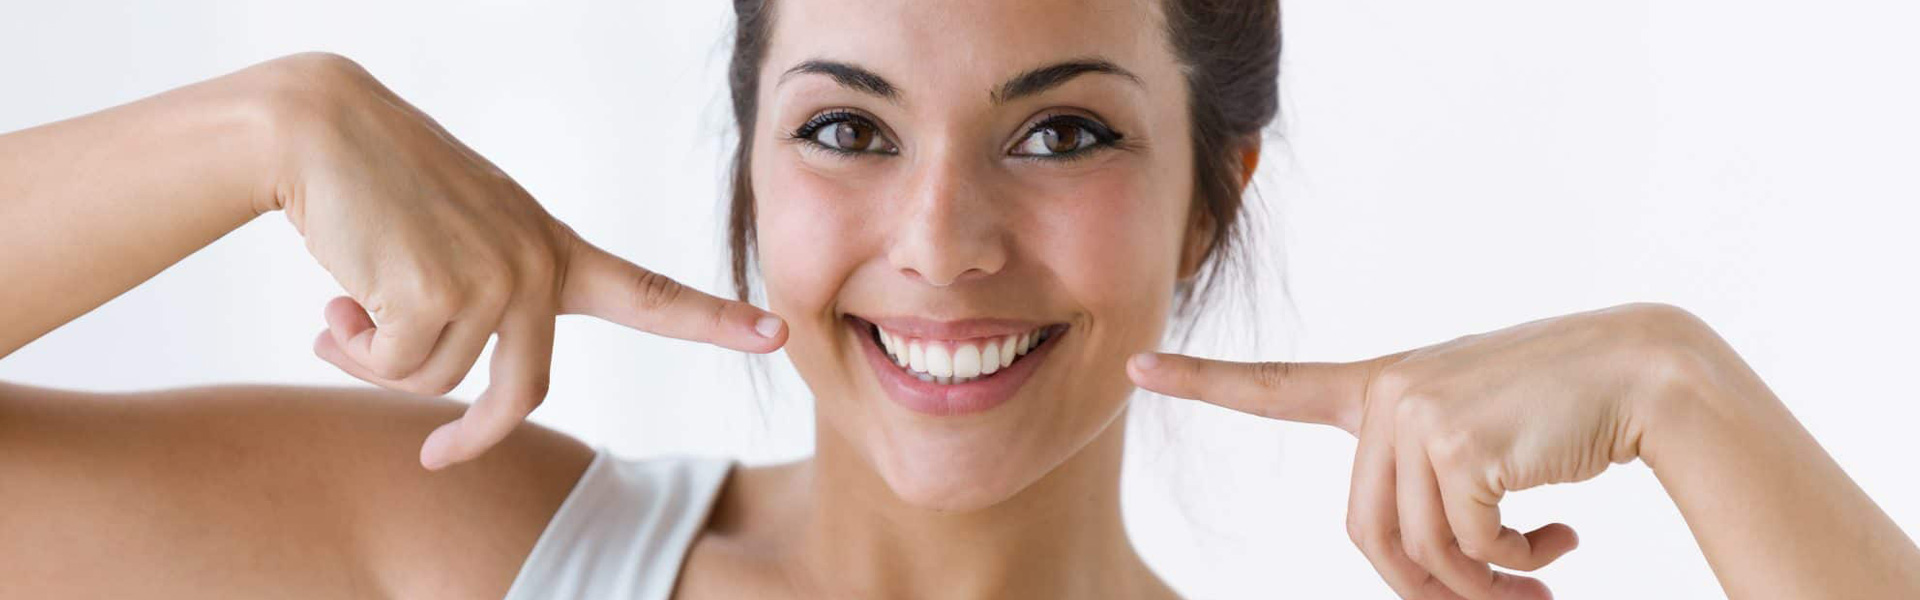 Cosmetic Dentistry Enhances Your Aesthetic Appearance and Oral Health Simultaneously